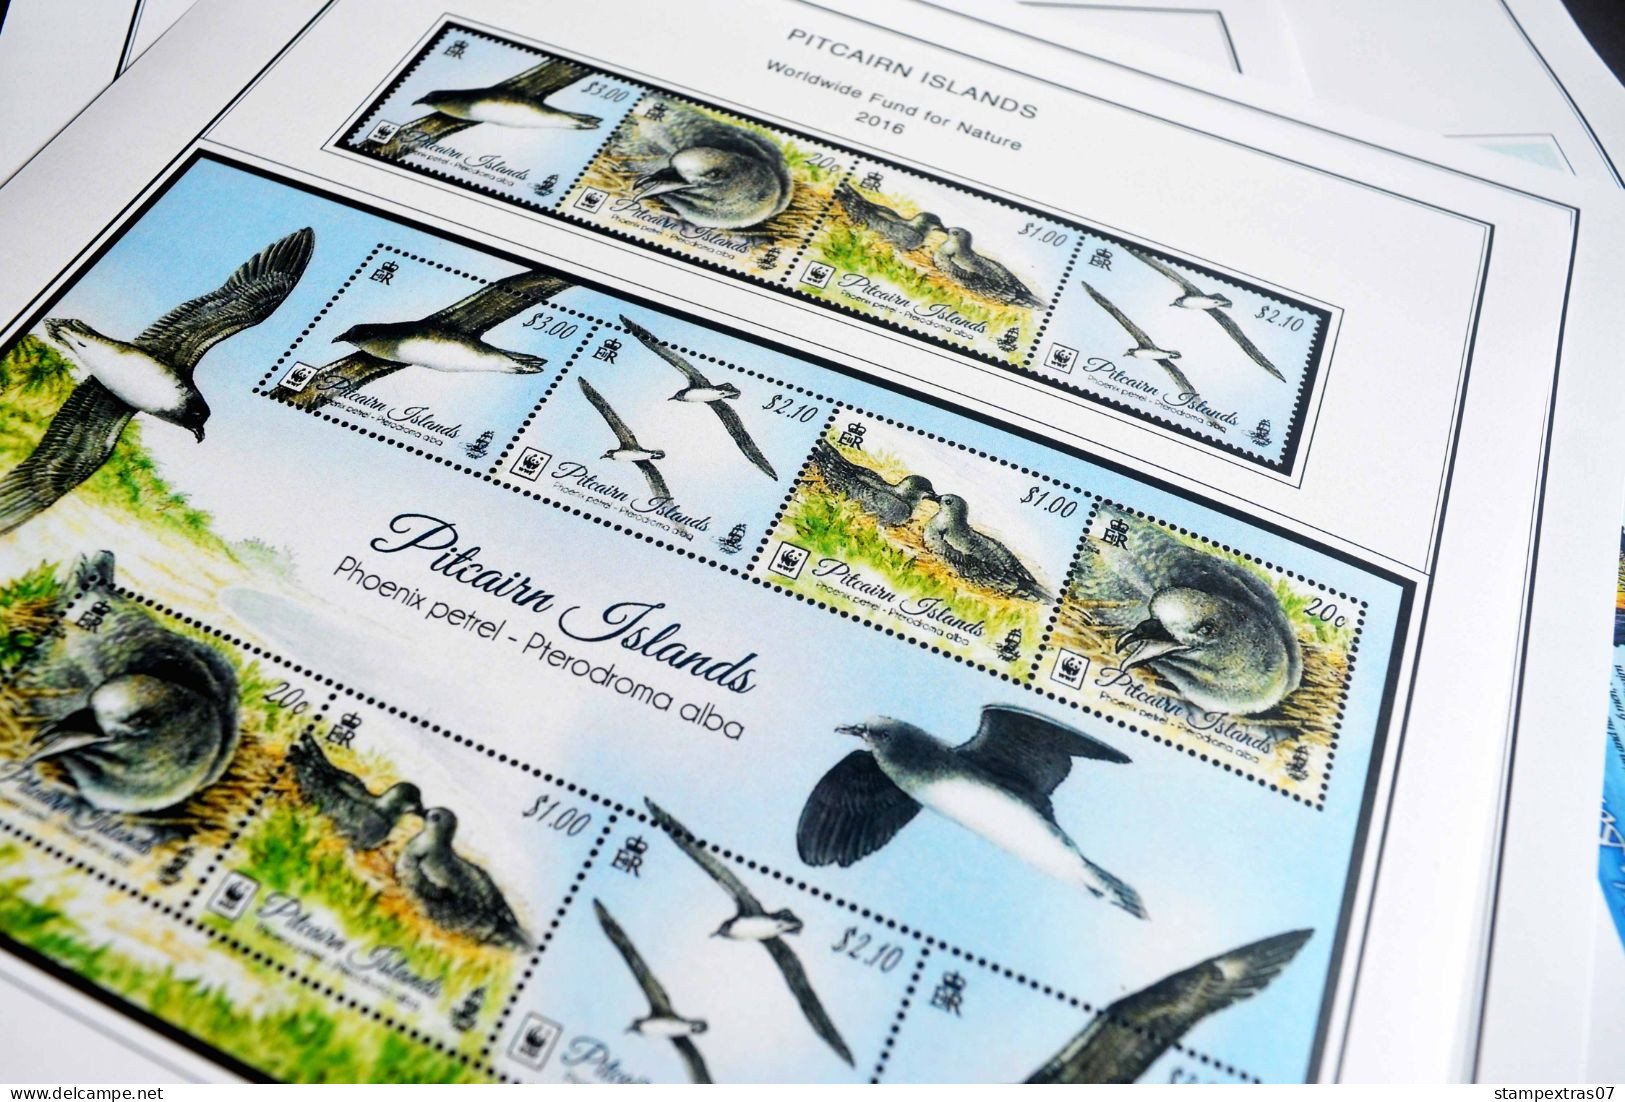 COLOR PRINTED PITCAIRN ISLANDS 2011-2023 STAMP ALBUM PAGES (41 illustrated pages) >> FEUILLES ALBUM+++